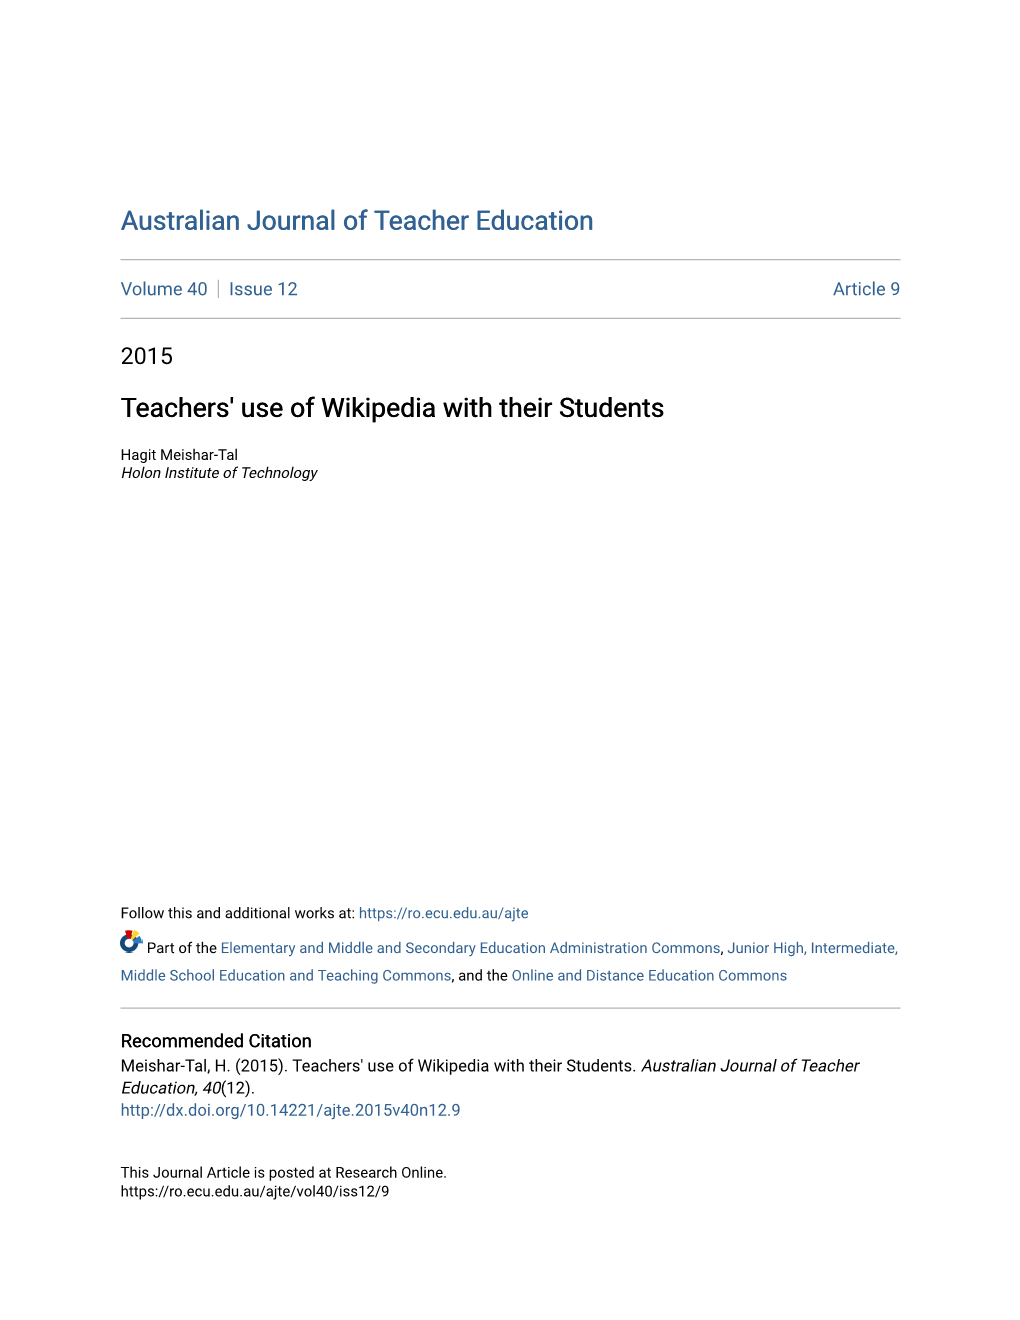 Teachers' Use of Wikipedia with Their Students